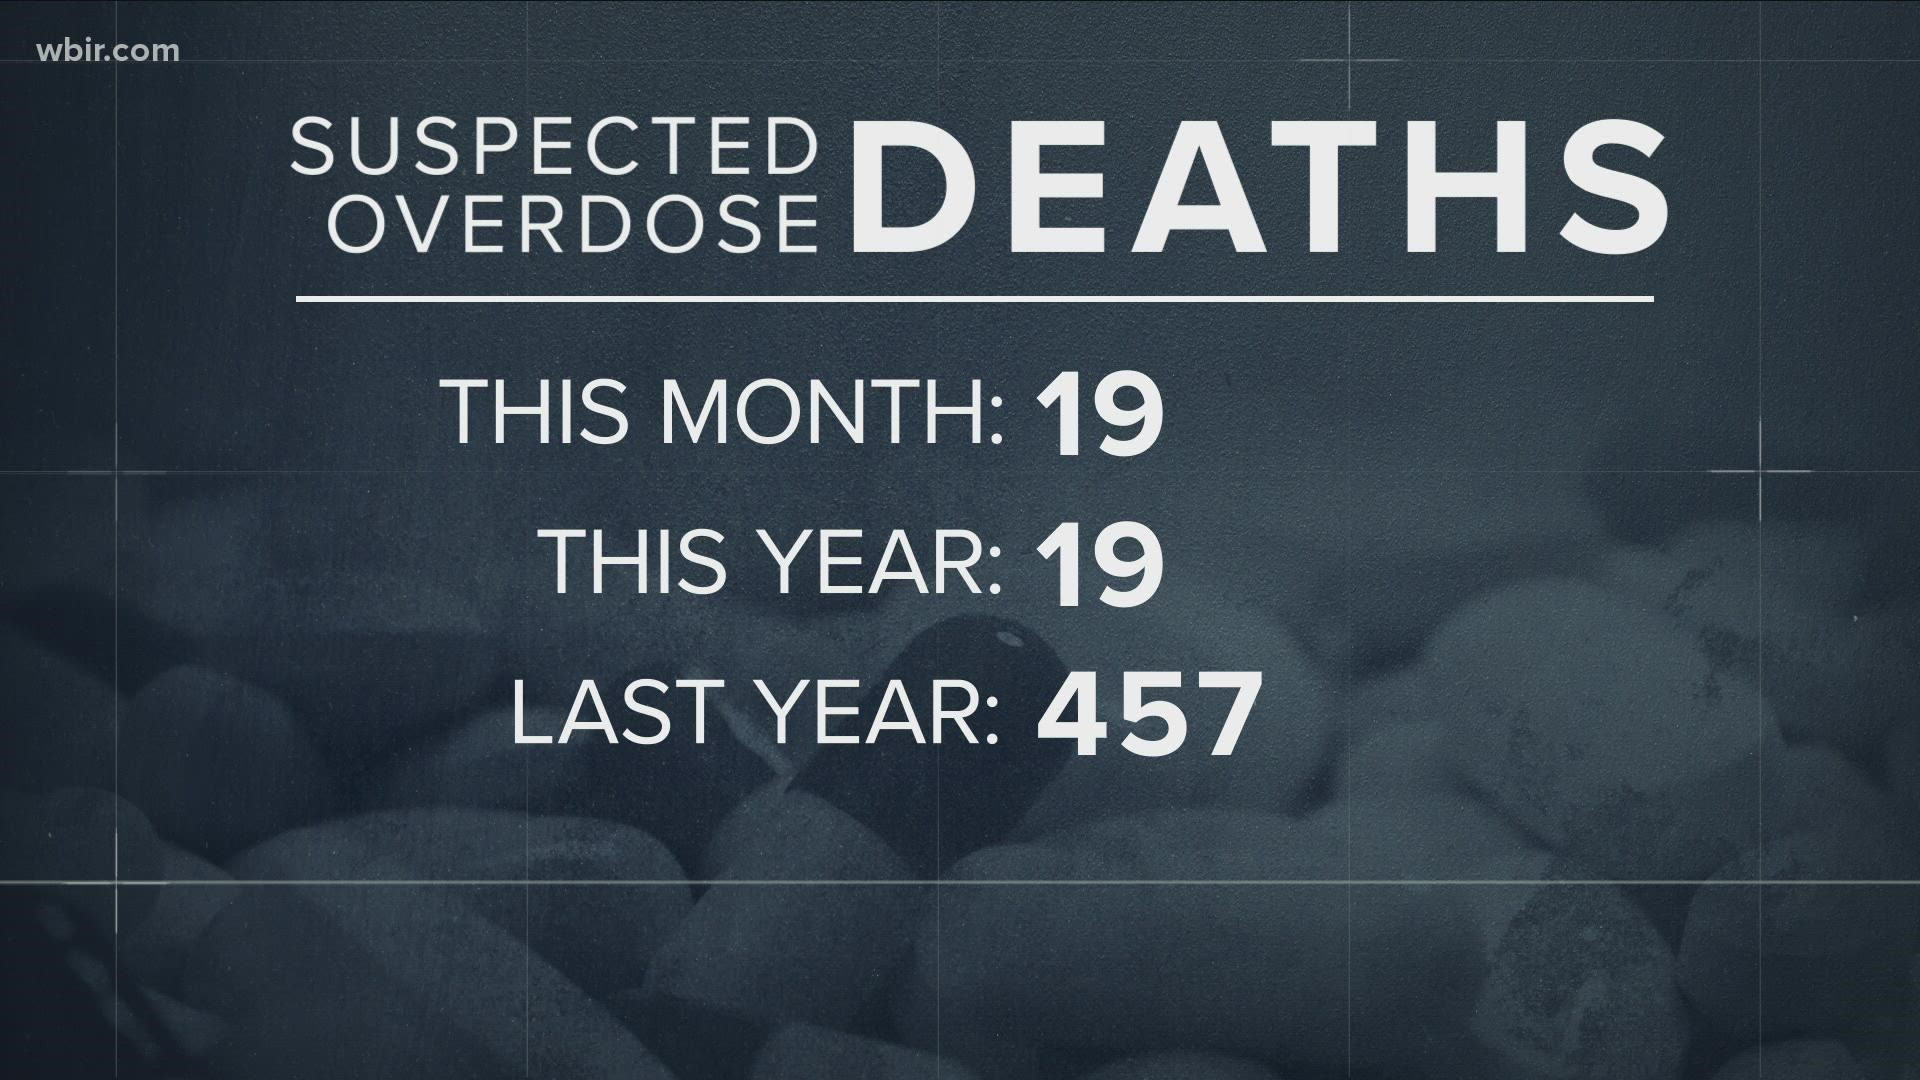 The District Attorney said 19 people died of a suspected overdose in Knox County so far in January.